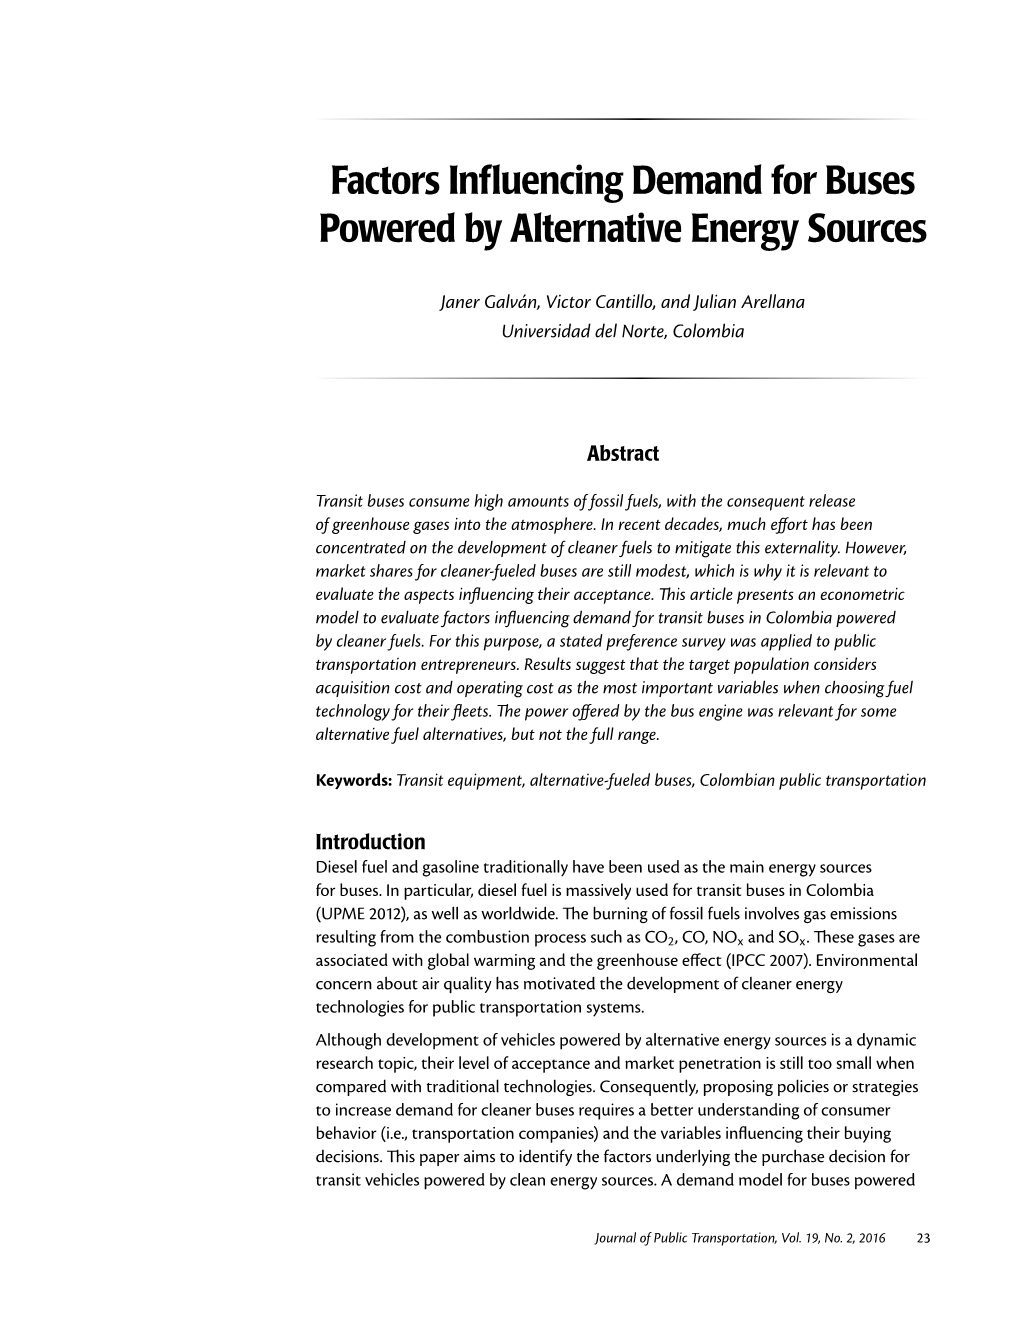 Factors Influencing Demand for Buses Powered by Alternative Energy Sources